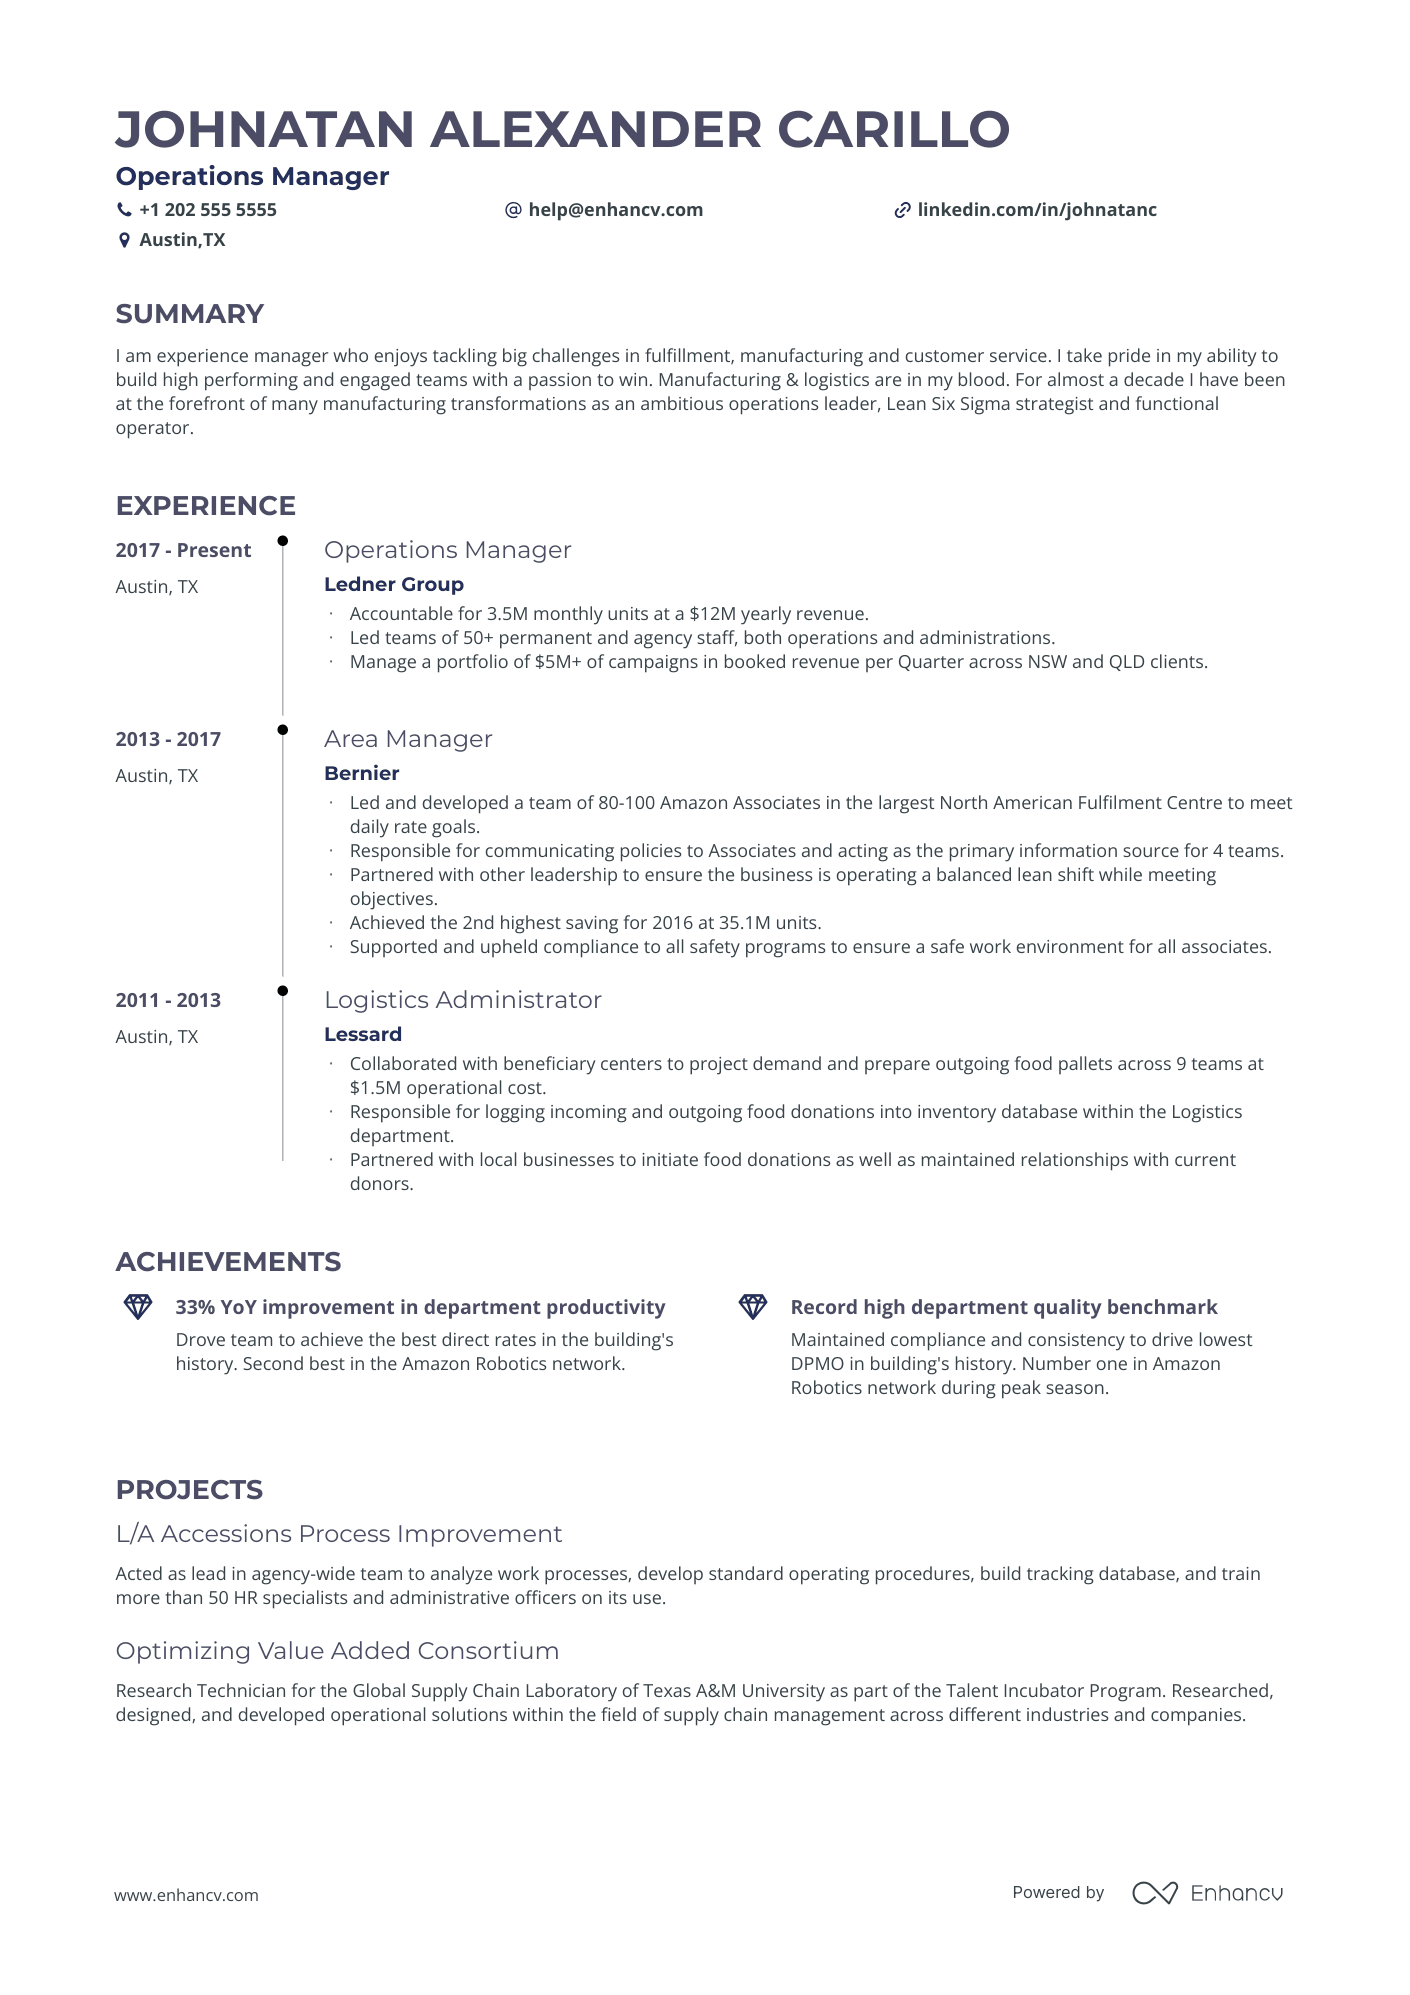 Operations Manager CV example